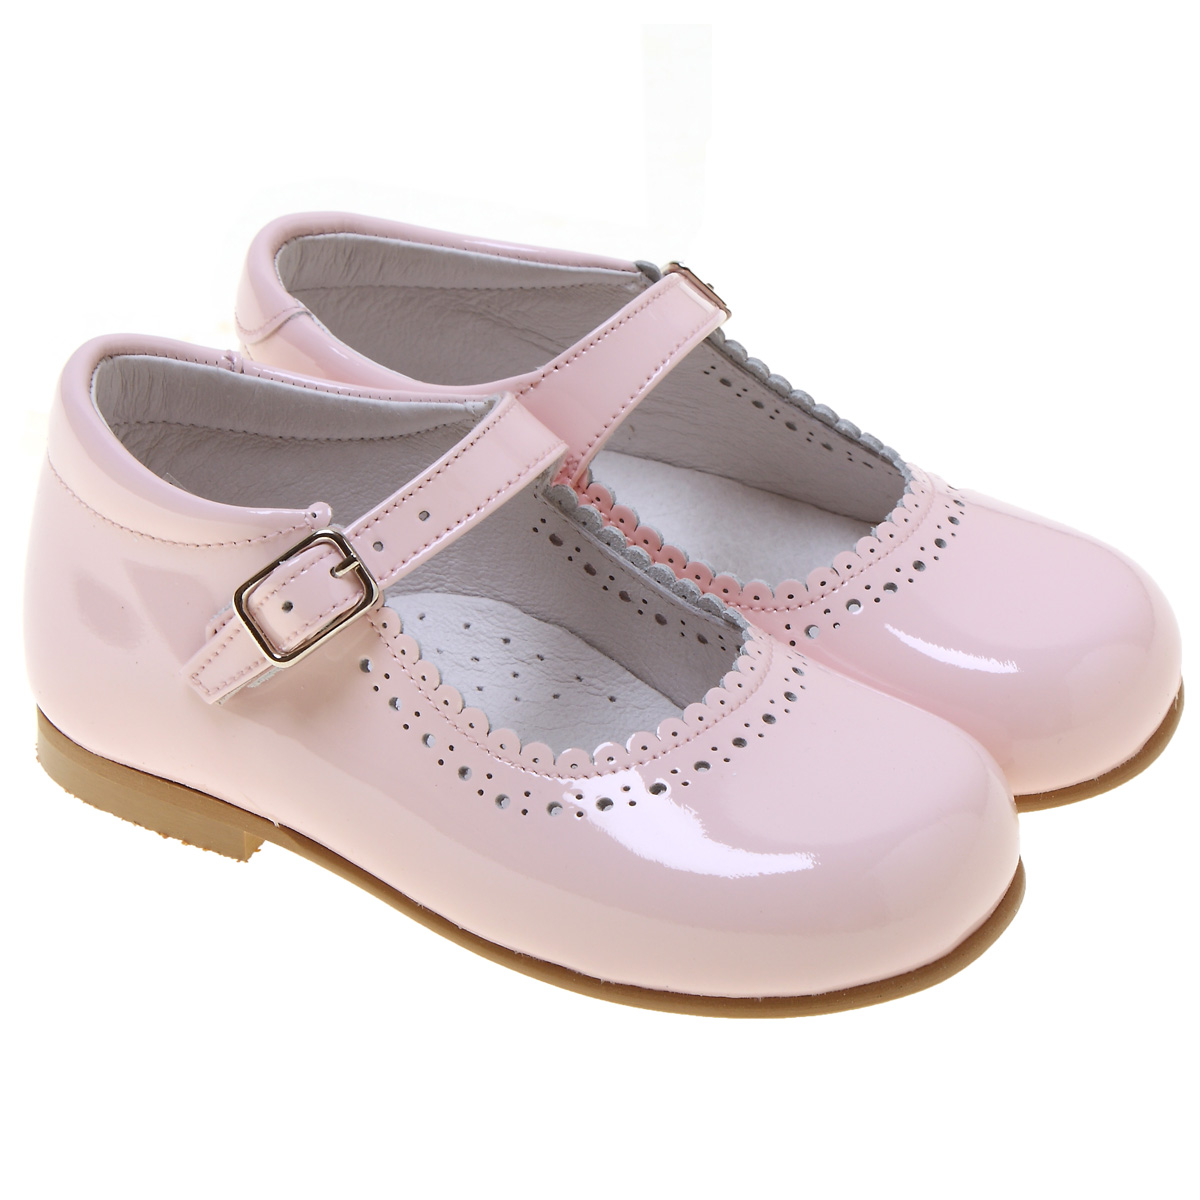 Toddler Girls Pink Patent Mary Jane Shoes Scallop Edge